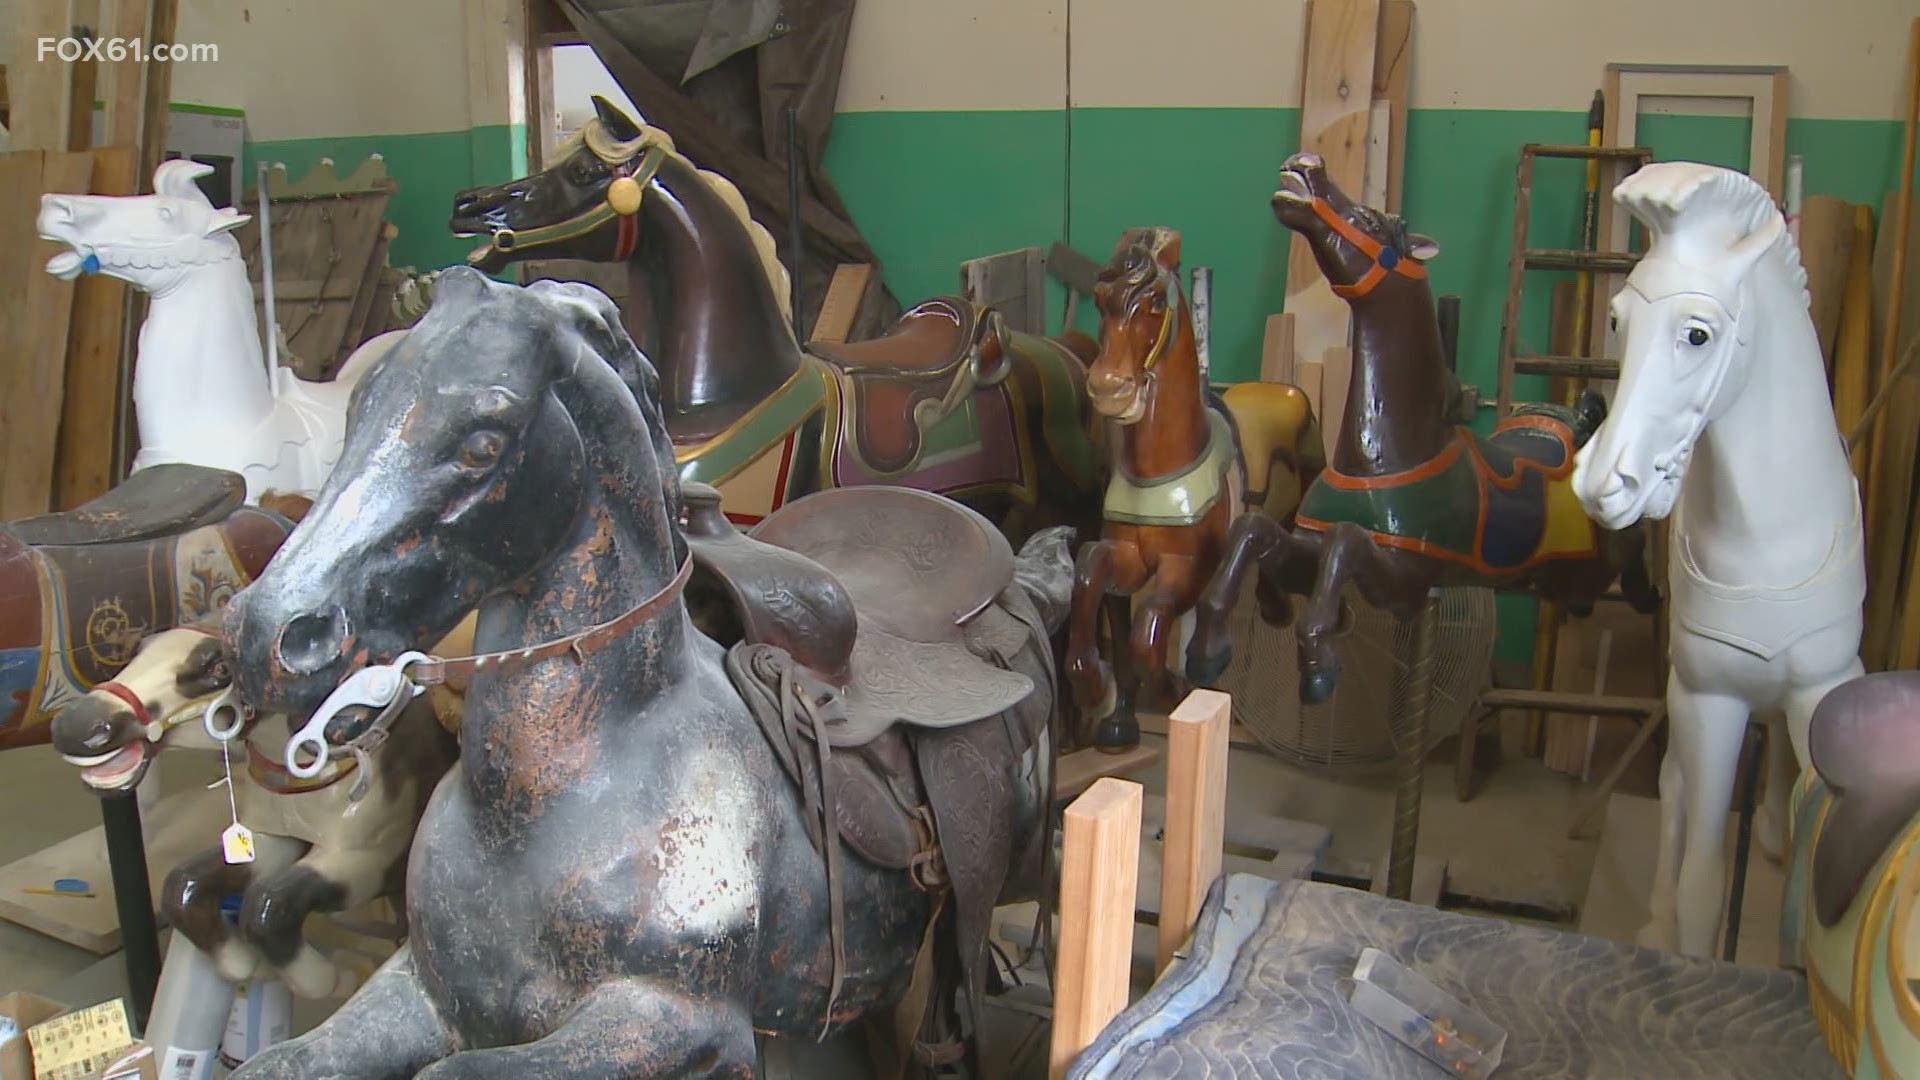 Team of artists and craftsmen get work from around the country, building new pieces and also restoring carousel horses